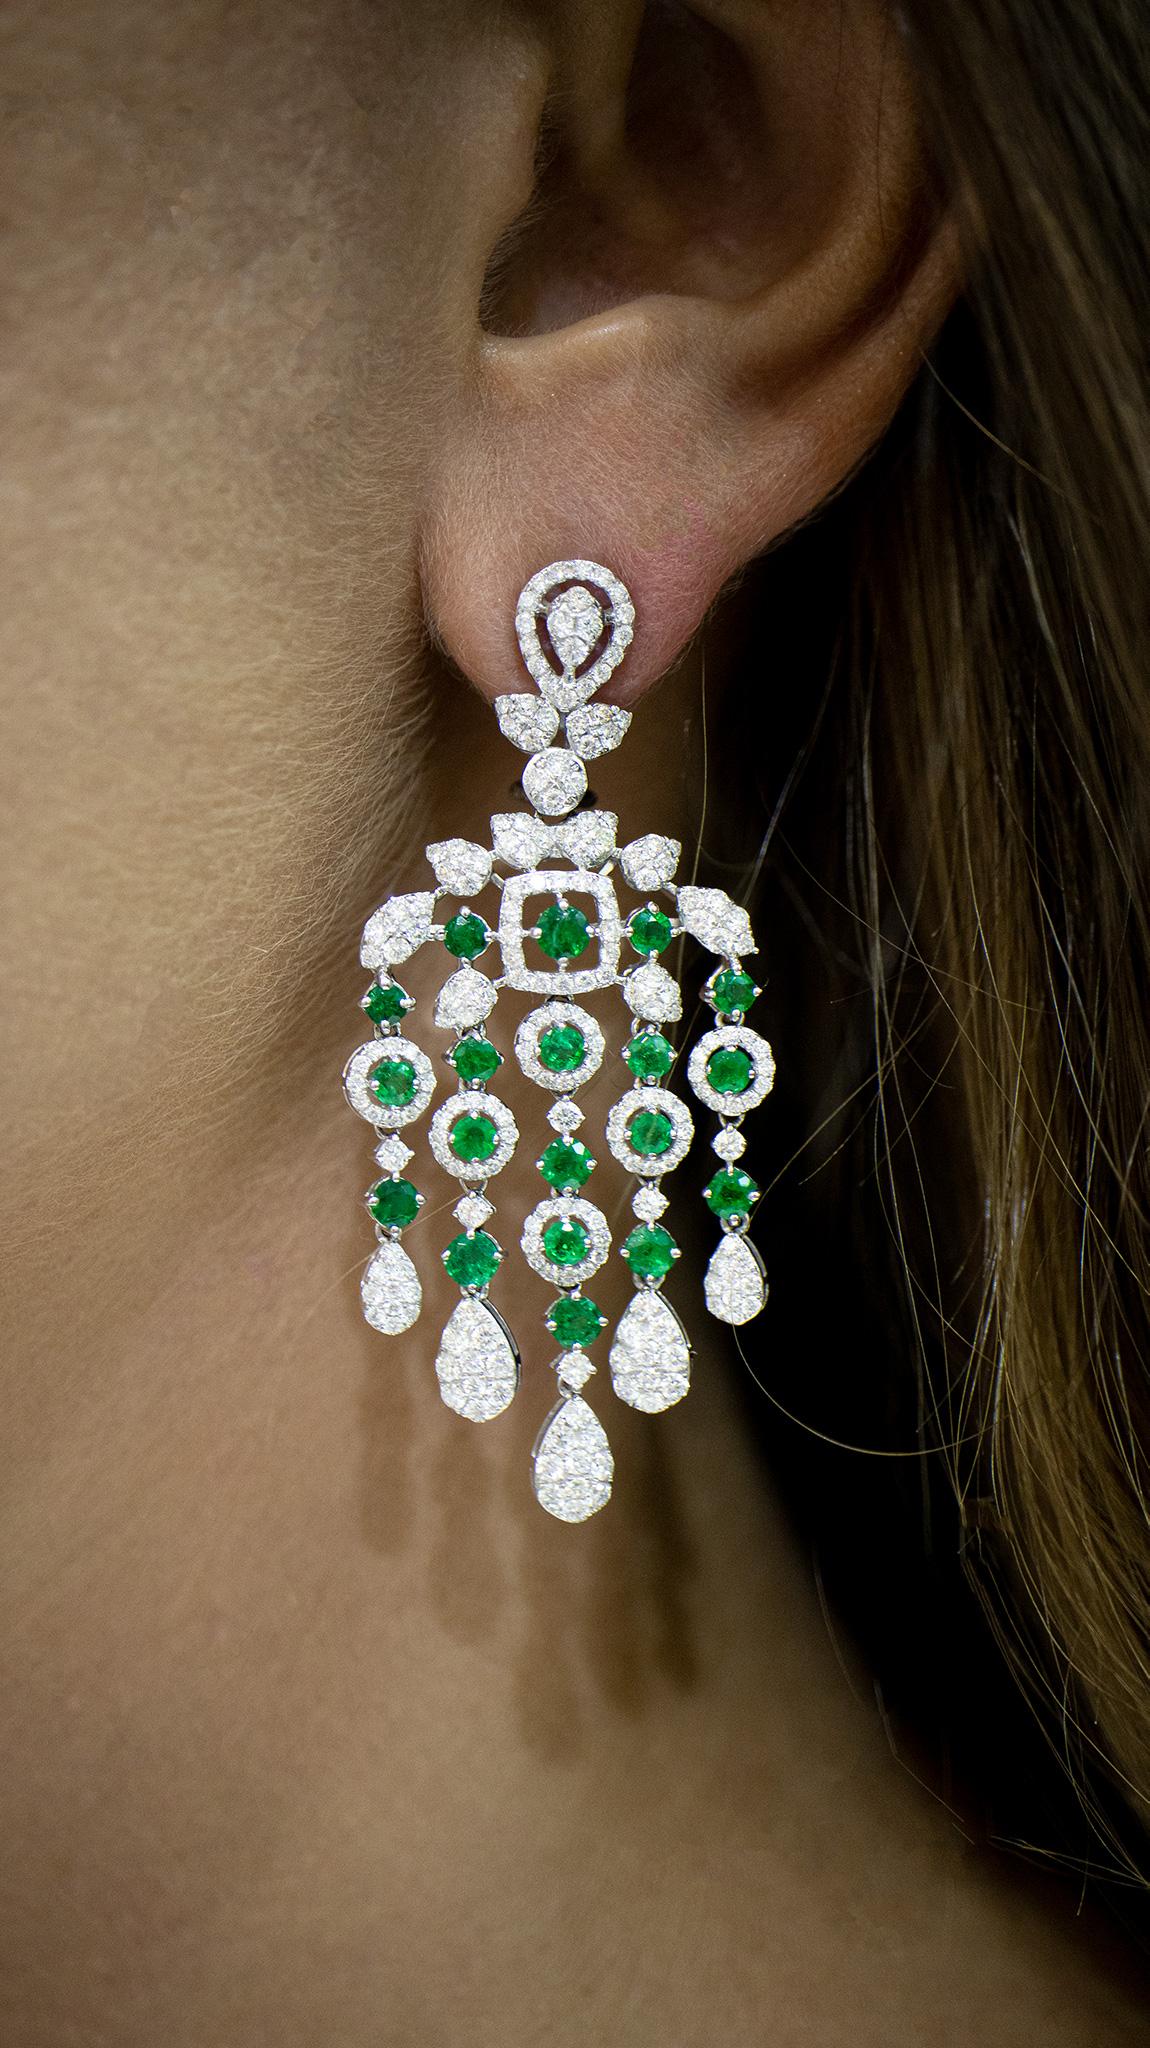 Beautiful Chandelier Earrings Set With Emeralds and Diamonds. It comes with an appraisal by GIA G.G.
Total Carat Weight of Emeralds is 3.46 Carats
Total Carat Weight of Diamonds is 3.87 Carats
Diamonds Color is F
Diamonds Clarity is VS+
Metal is 18K